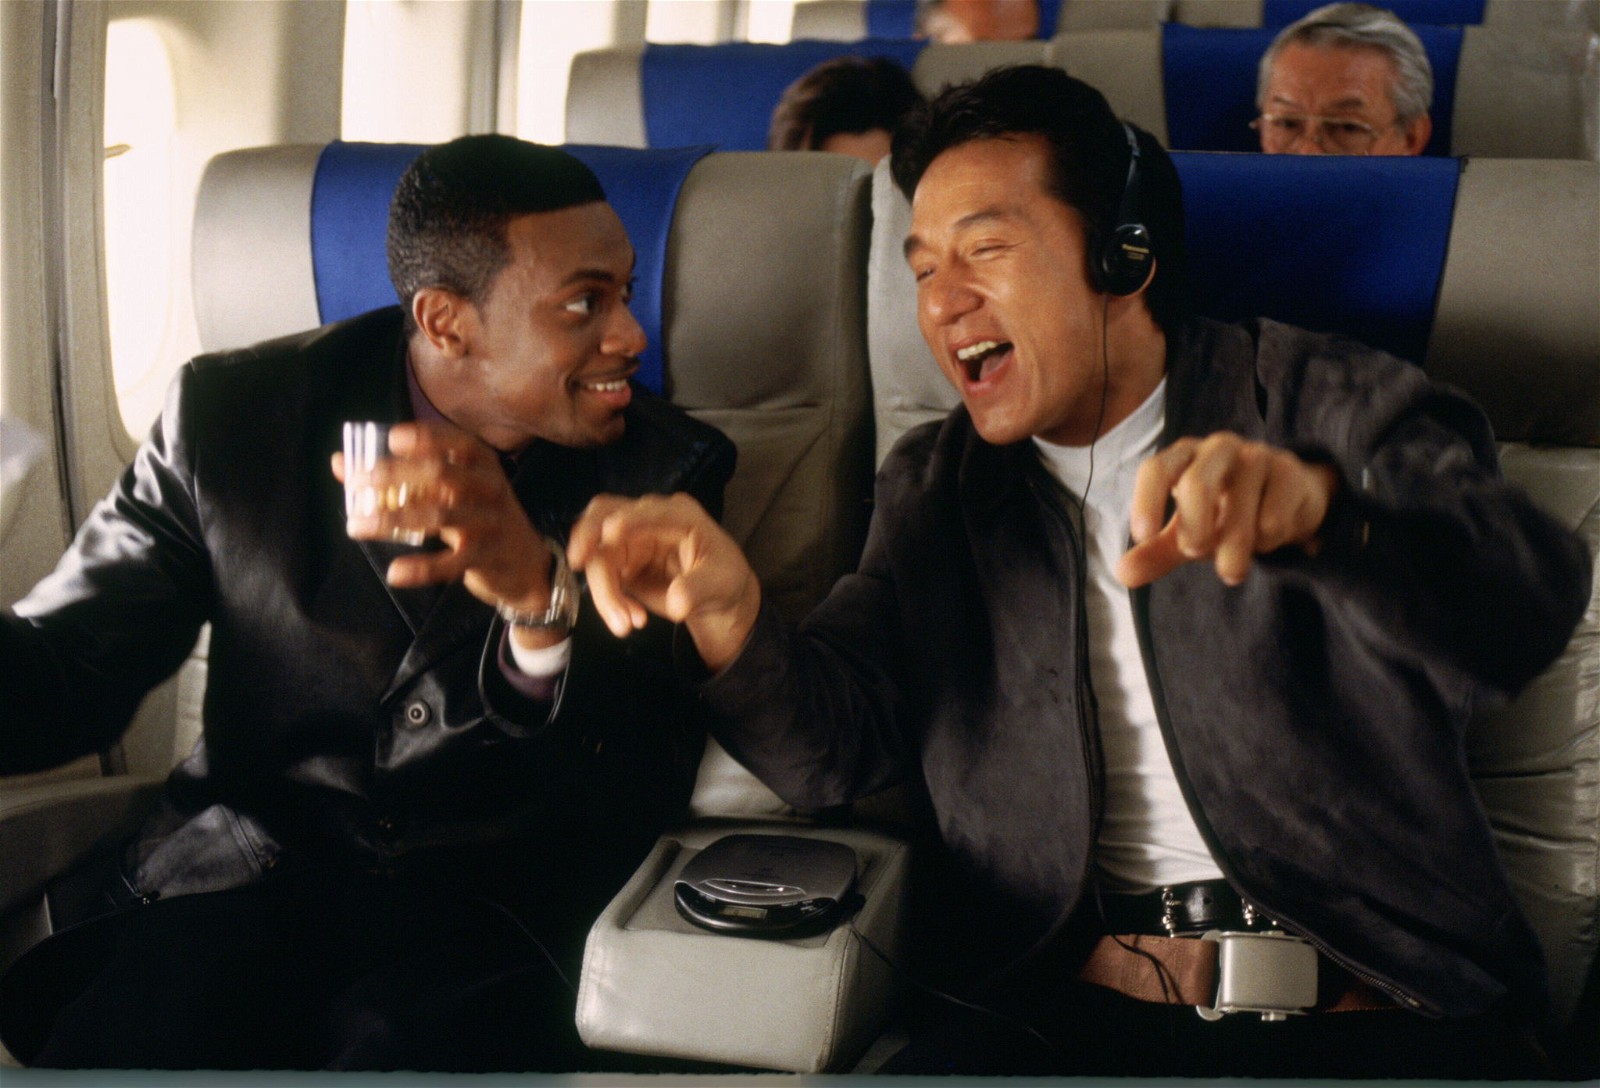 Jackie Chan and Chris Tucker became an iconic buddy cop due to the Rush Hour franchise